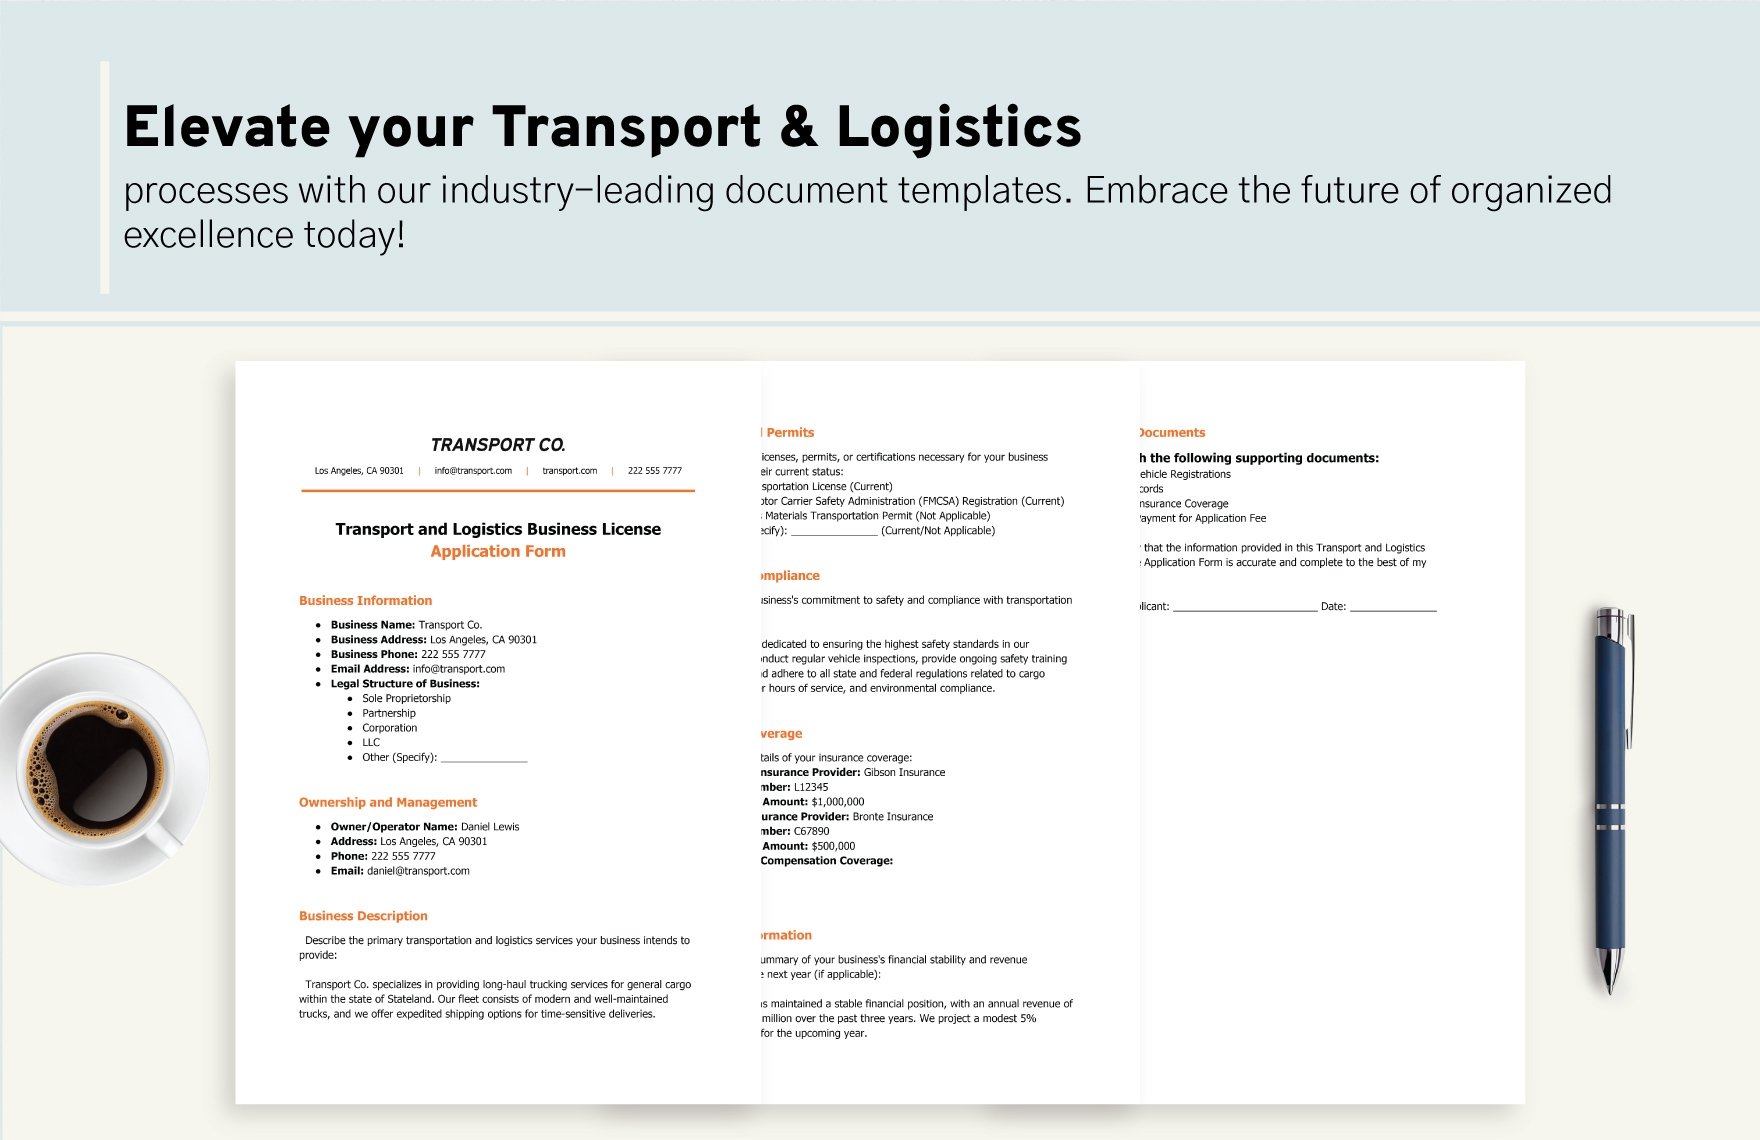 Transport and Logistics Business License Application Form Template